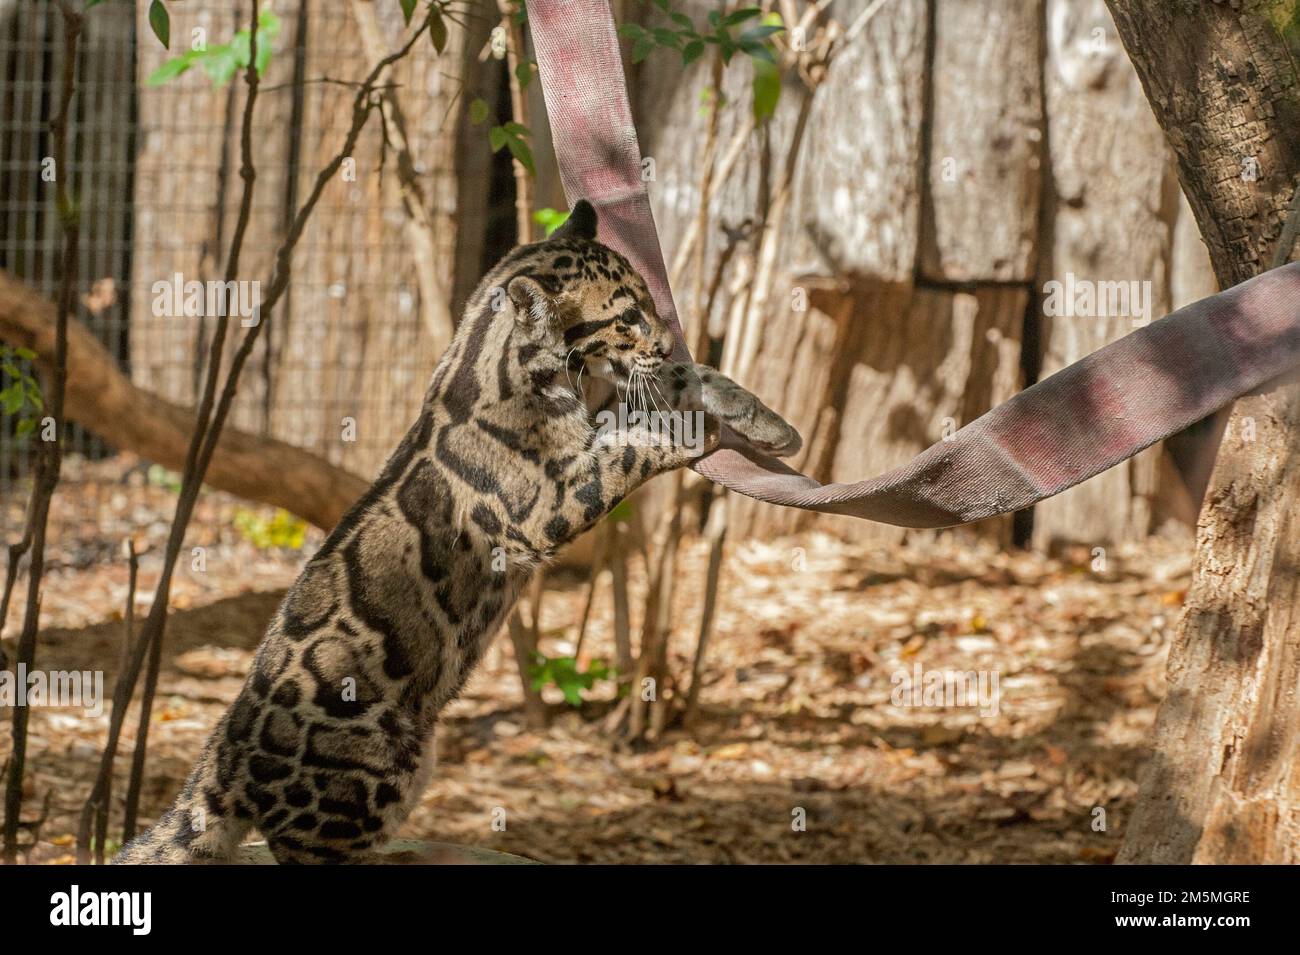 A clouded leopard (Neofelis nebulosa) cub at the Nashville, Tennessee Zoo, about four months old, plays with a piece of fire hose in its pen. Stock Photo